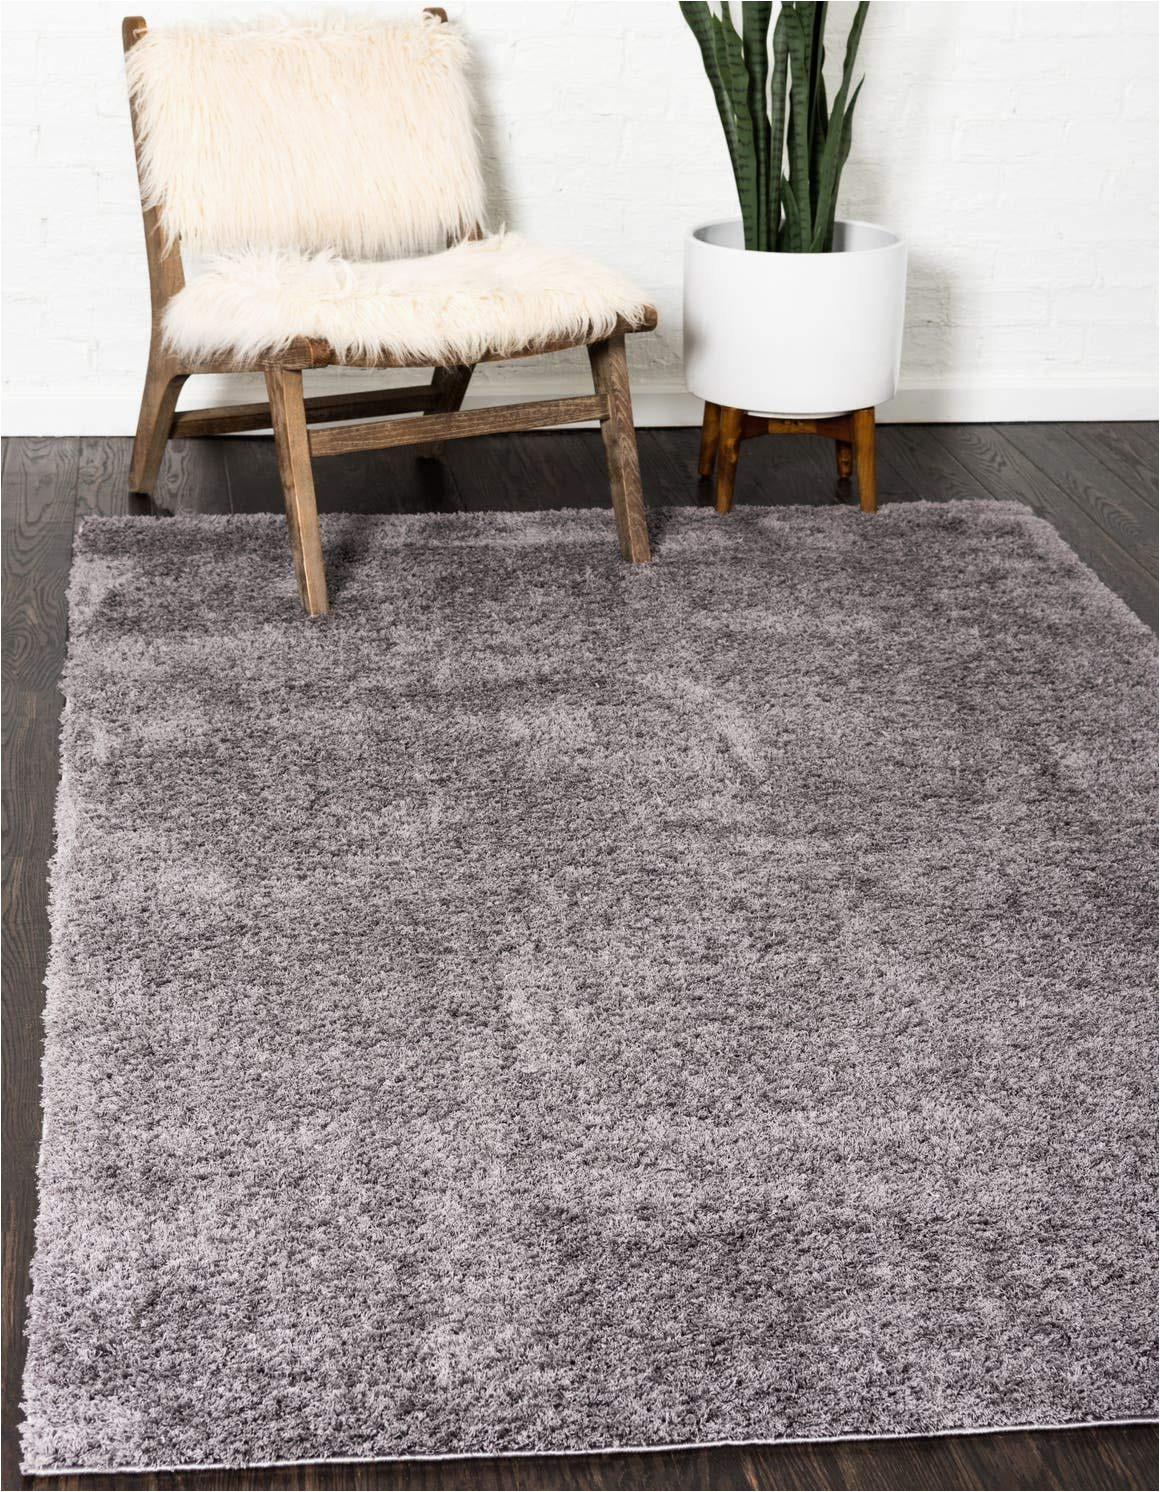 Sterling Gray solid Loomed area Rug Unique Loom Studio solid Shag Collection Urban Modern Super soft & Plush area Rug, 9 Ft X 12 Ft, Dark Gray